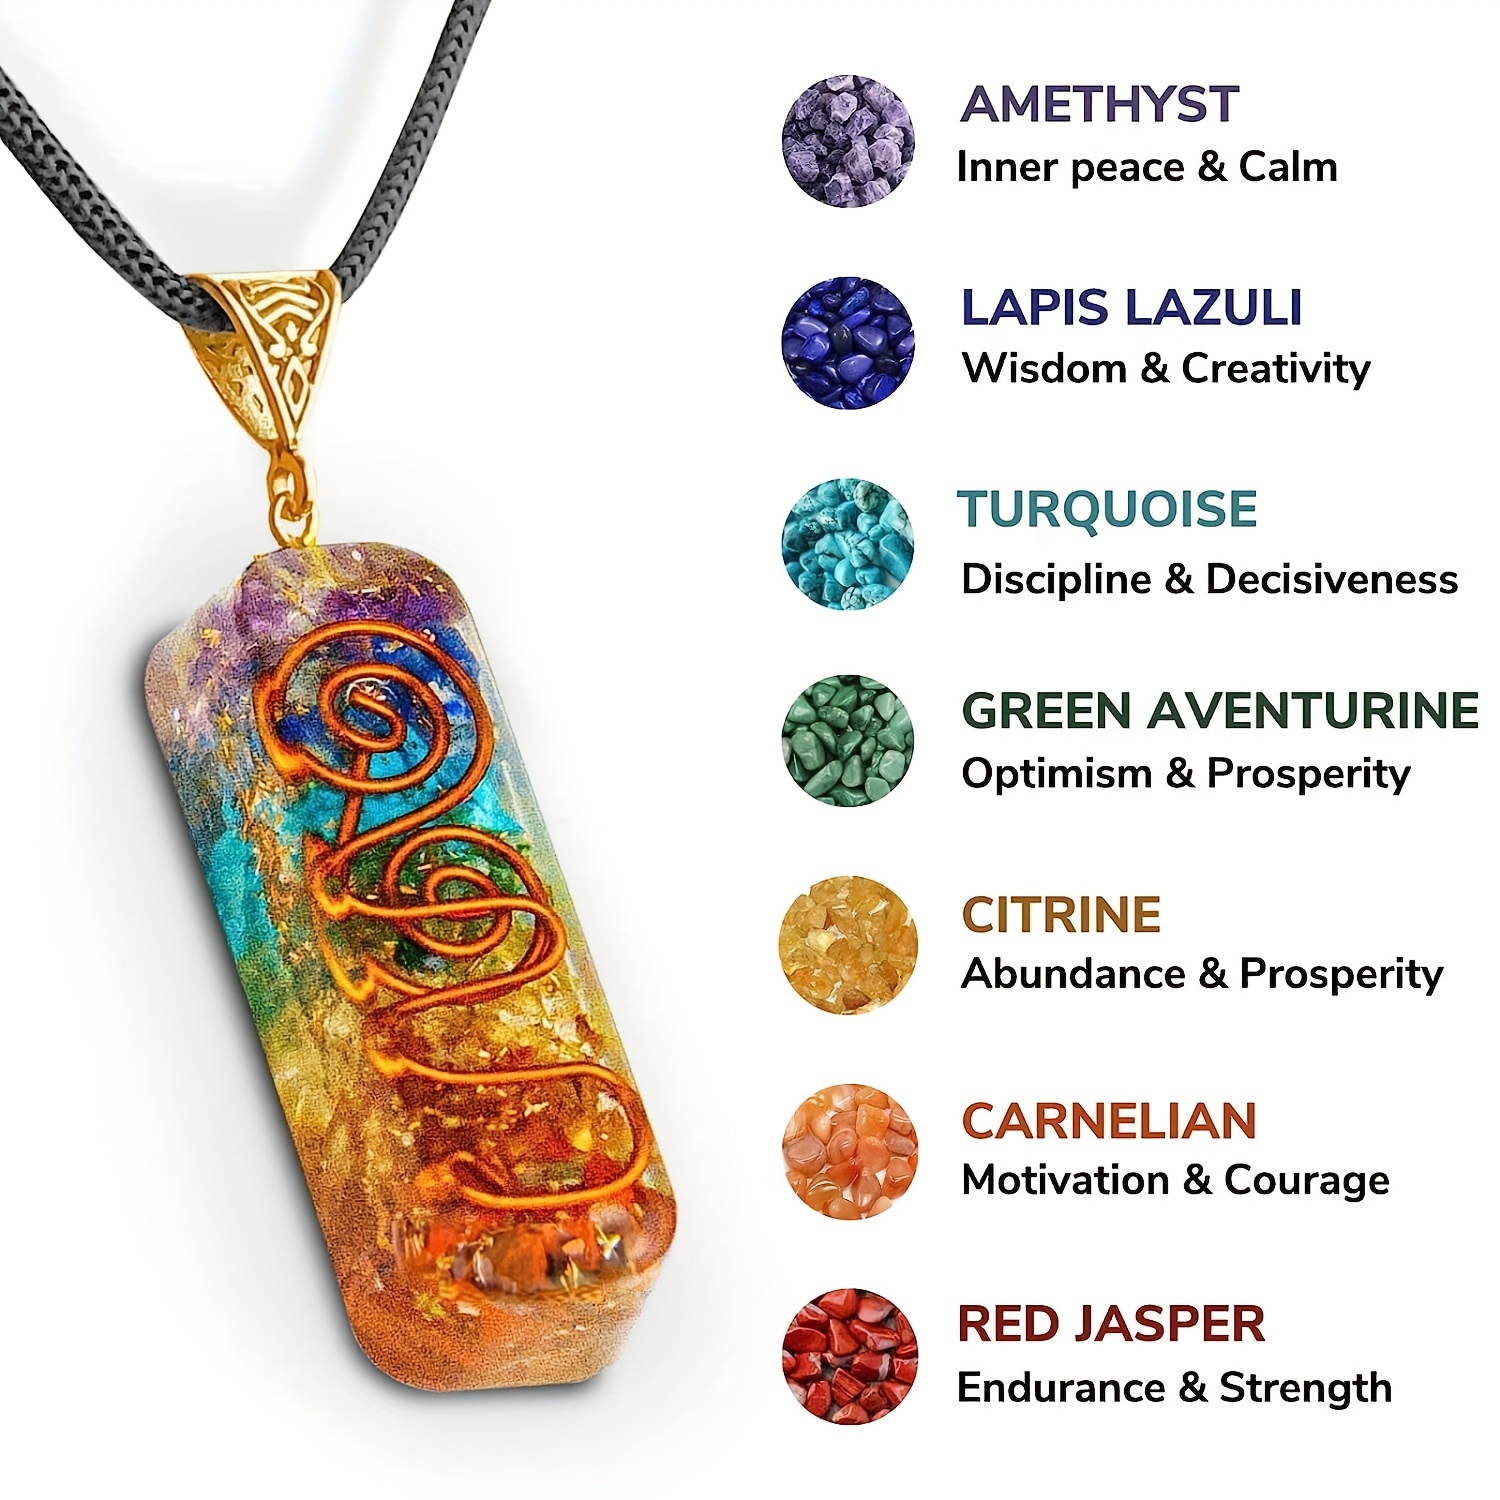 Handmade 7 Chakra Necklace with Adjustable Cord - Healing Orgone